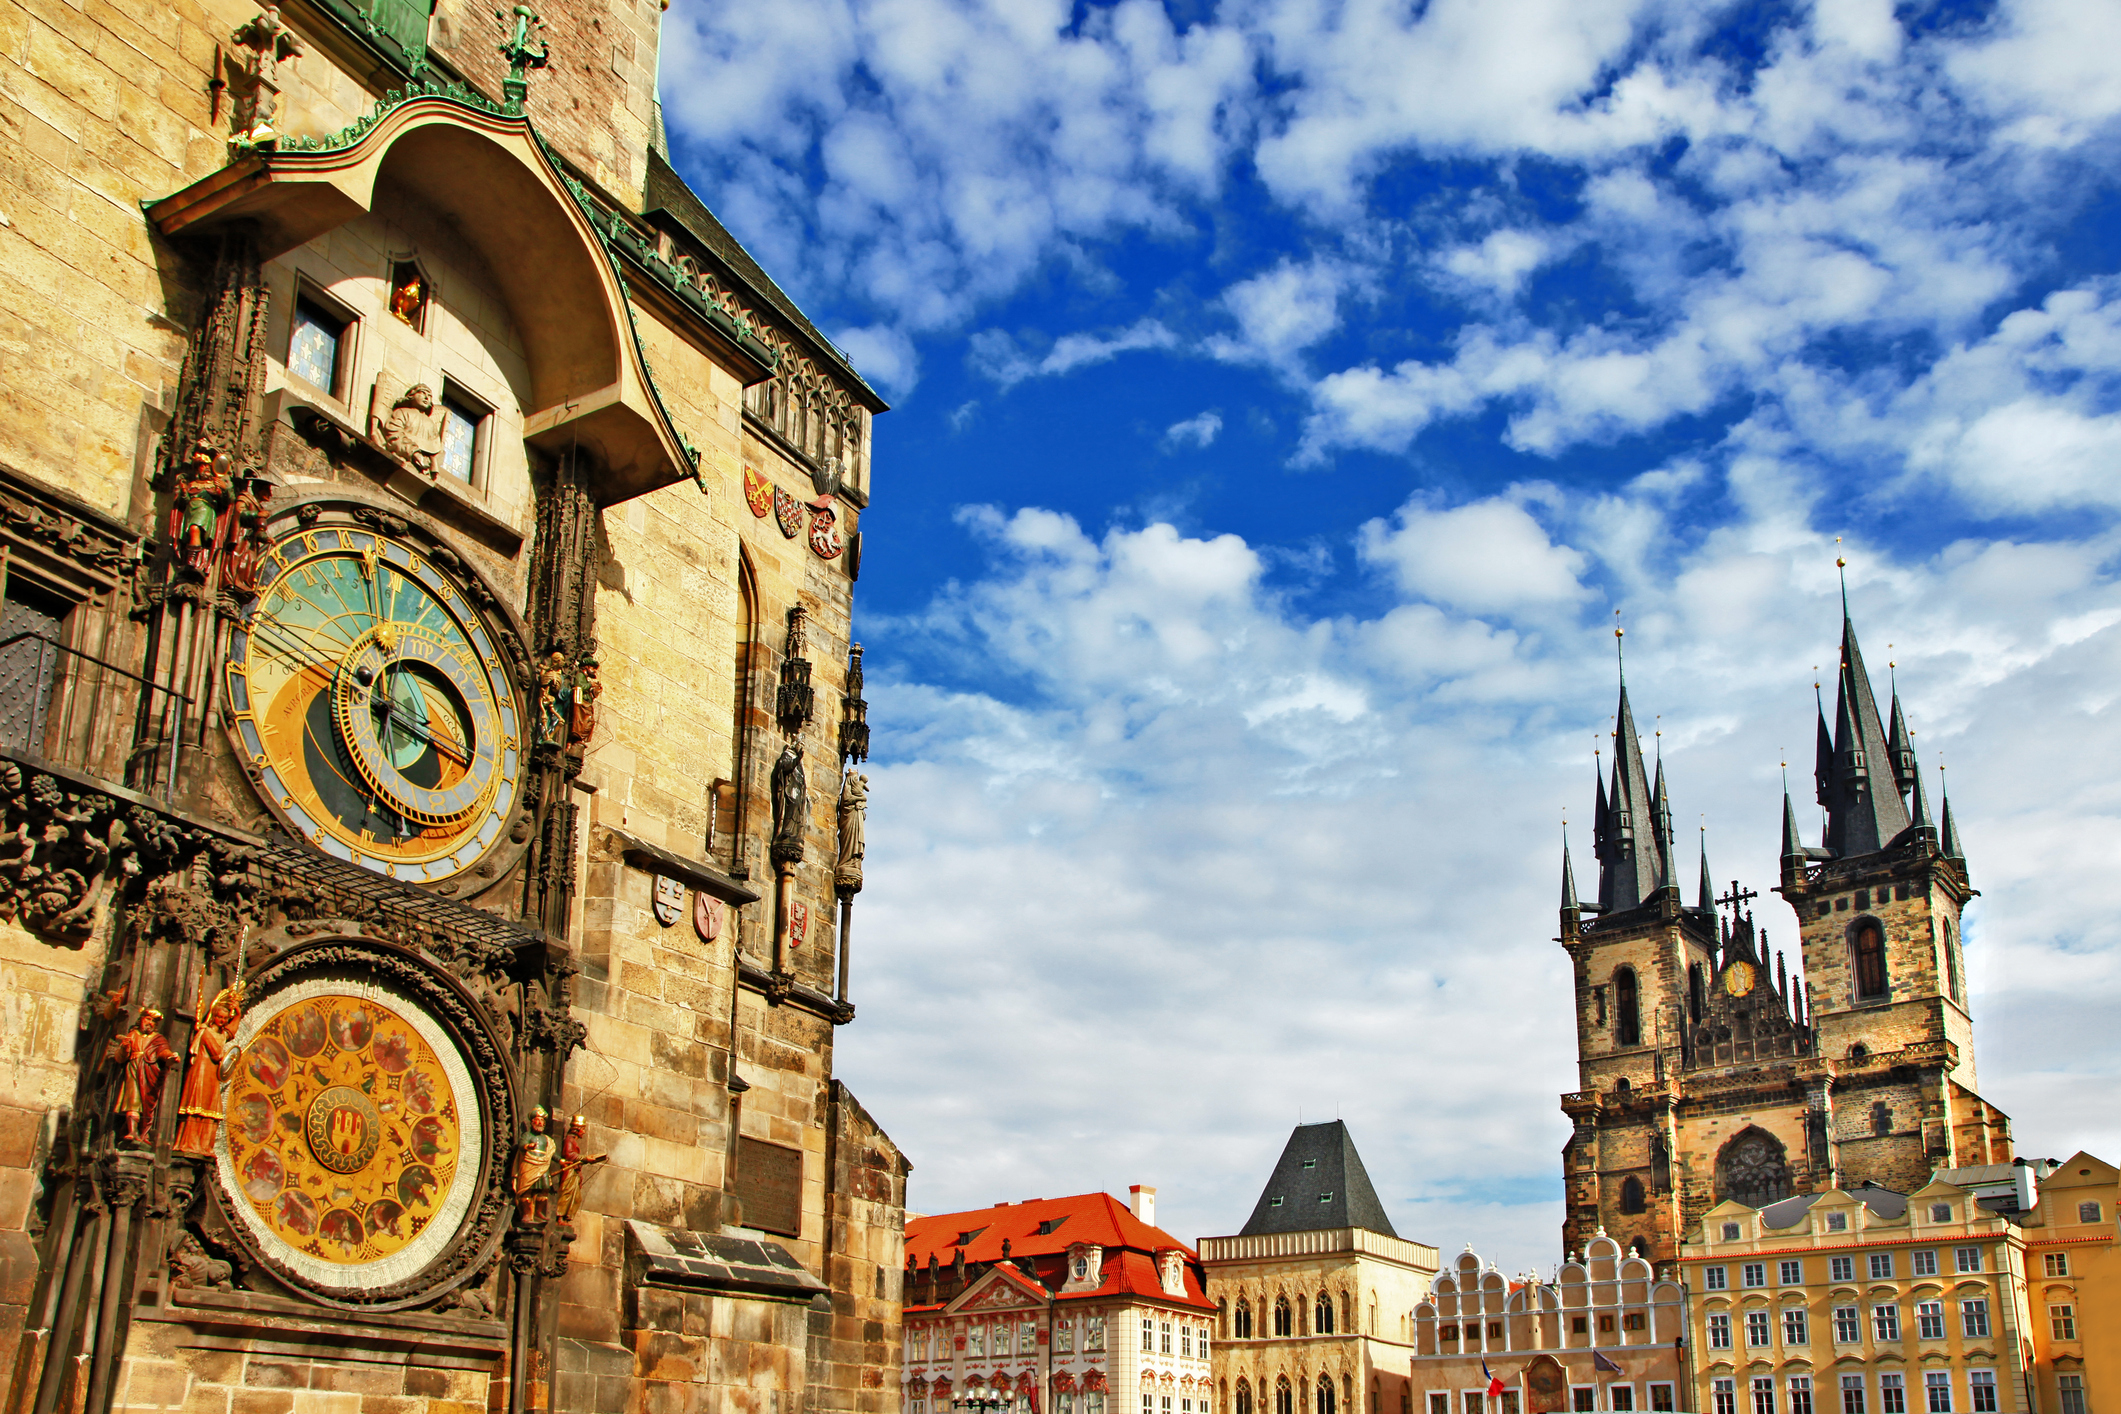 The Old City Hall in Prague with its famous clock (Freeartist/Getty Images)